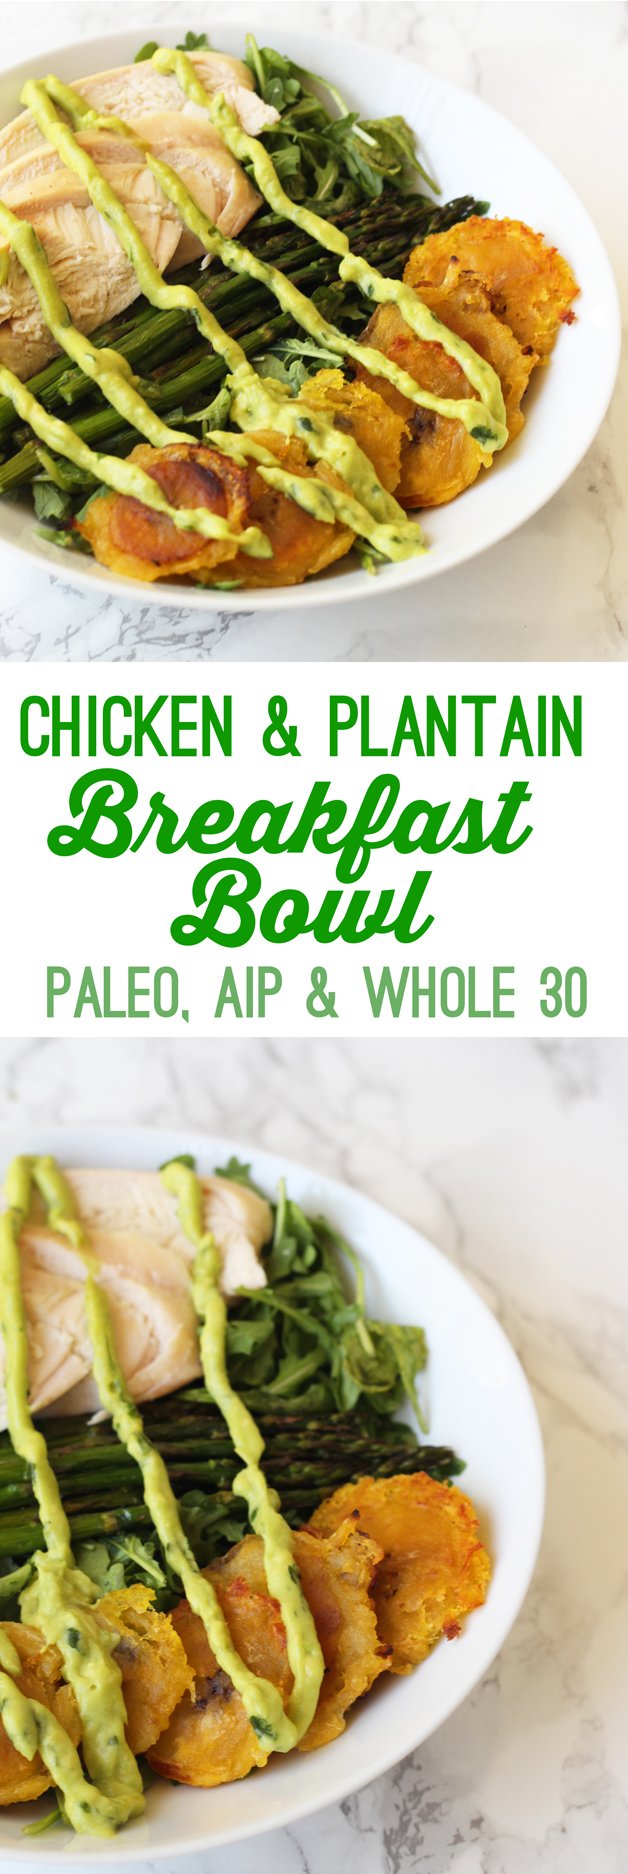 Chicken & Plantain Breakfast Bowl (Whole 30, AIP, Paleo)